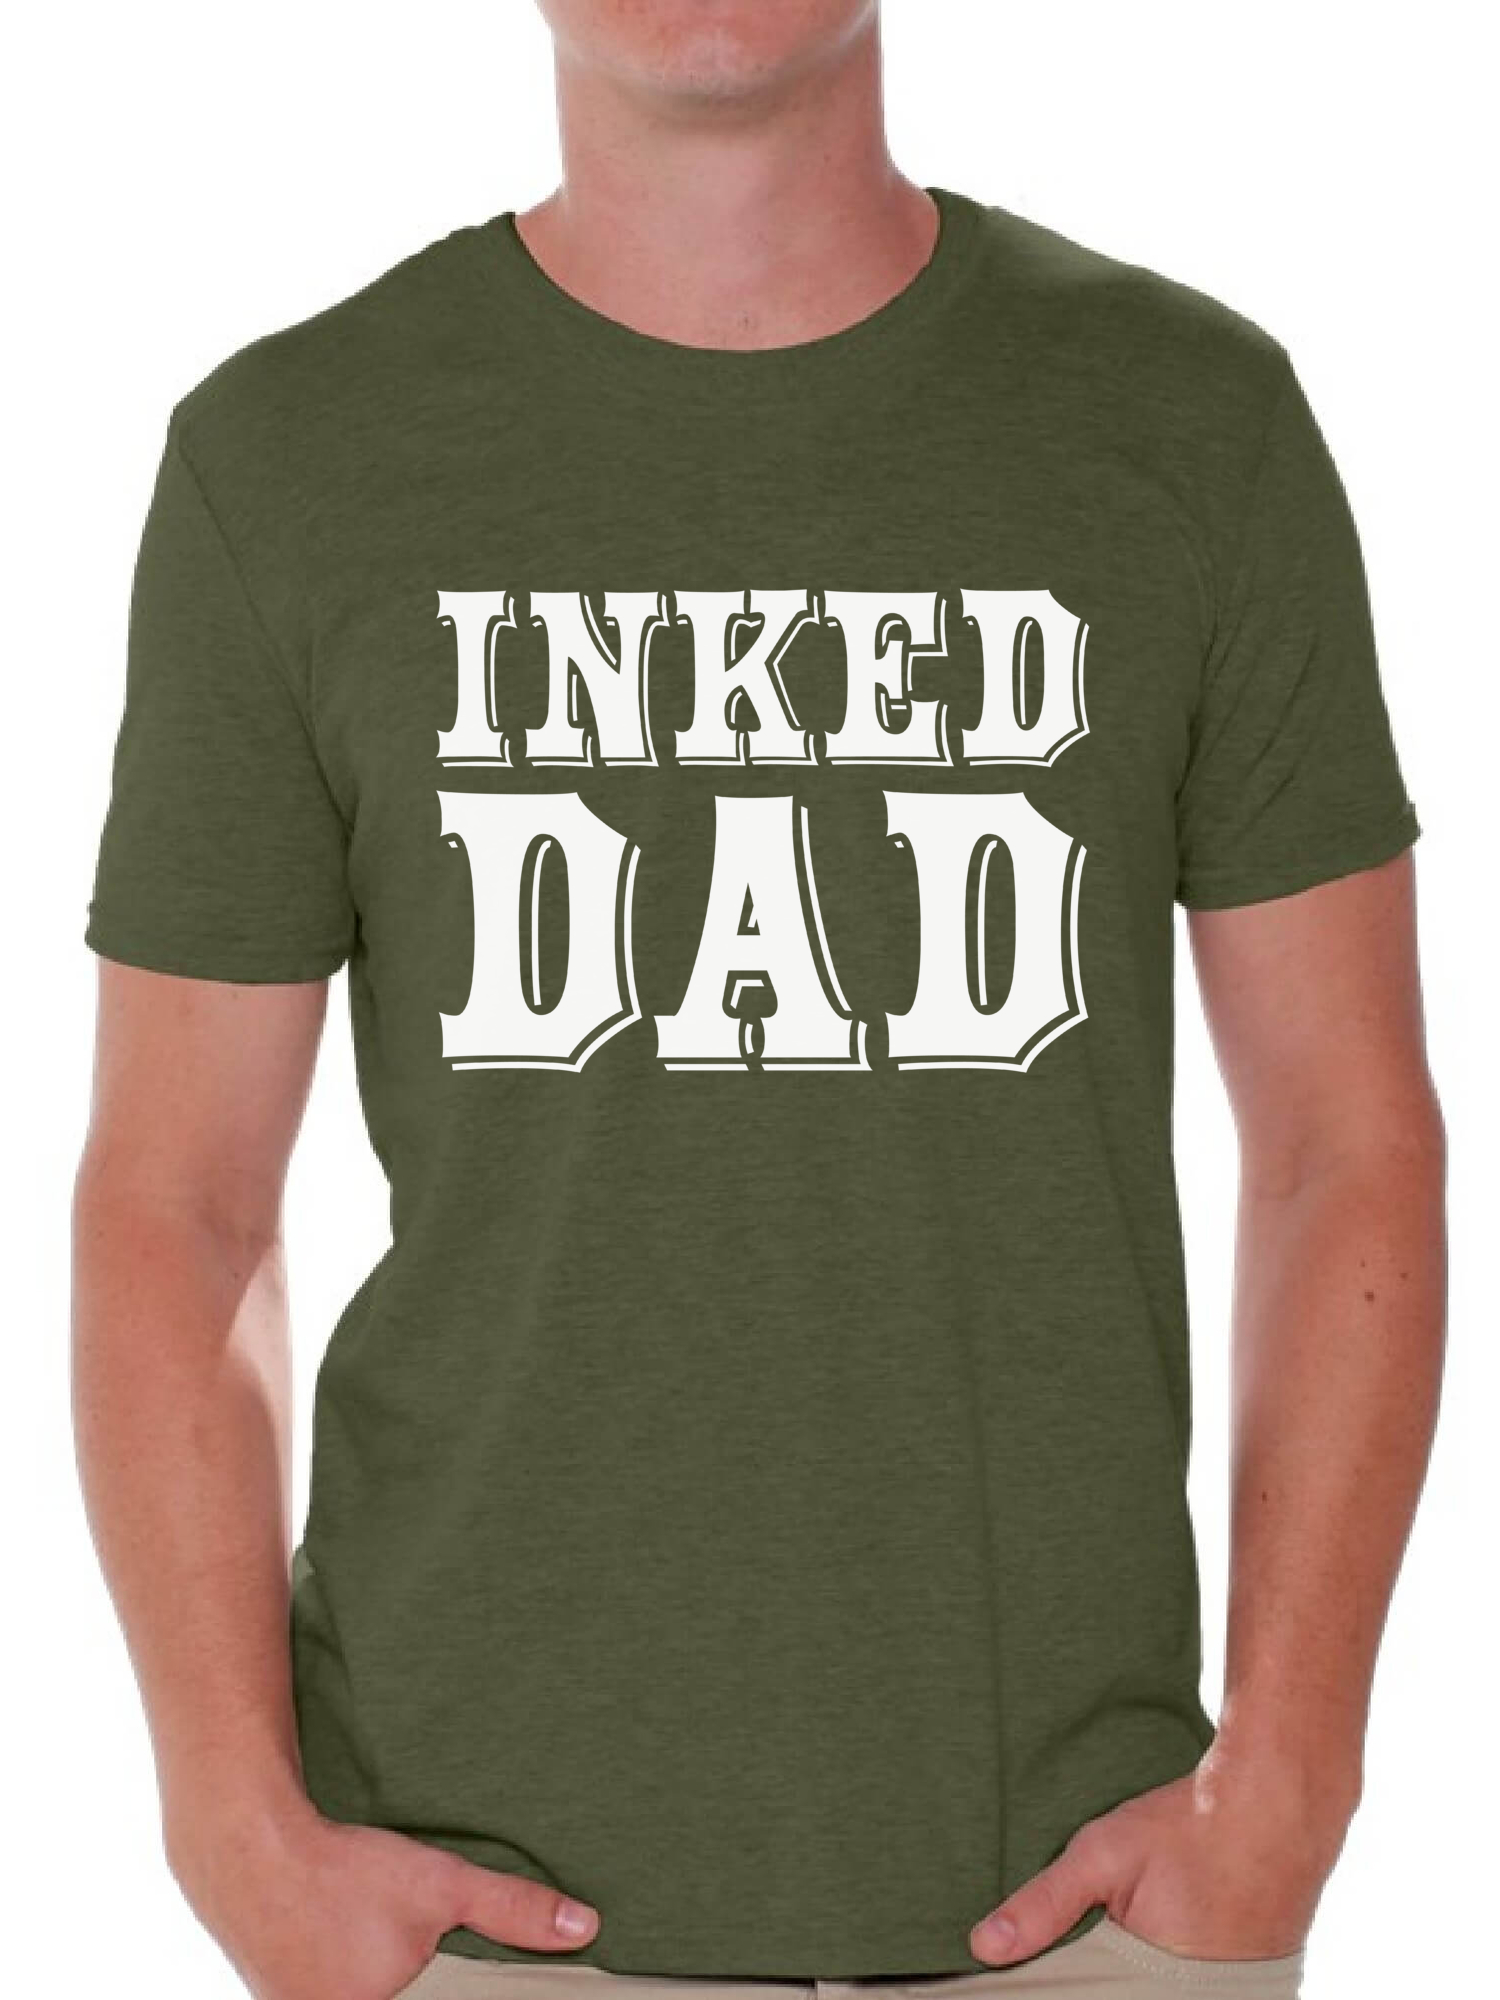 Awkward Styles Inked Dad Tshirt for Men Tattooed Dad Shirt Tatted Dad T Shirt Best Gifts for Dad Cool Tattoo Dad Shirt Tattoo Shirts with Sayings for Men Amazing Gifts for Dad Top Dad Shirt - image 1 of 4